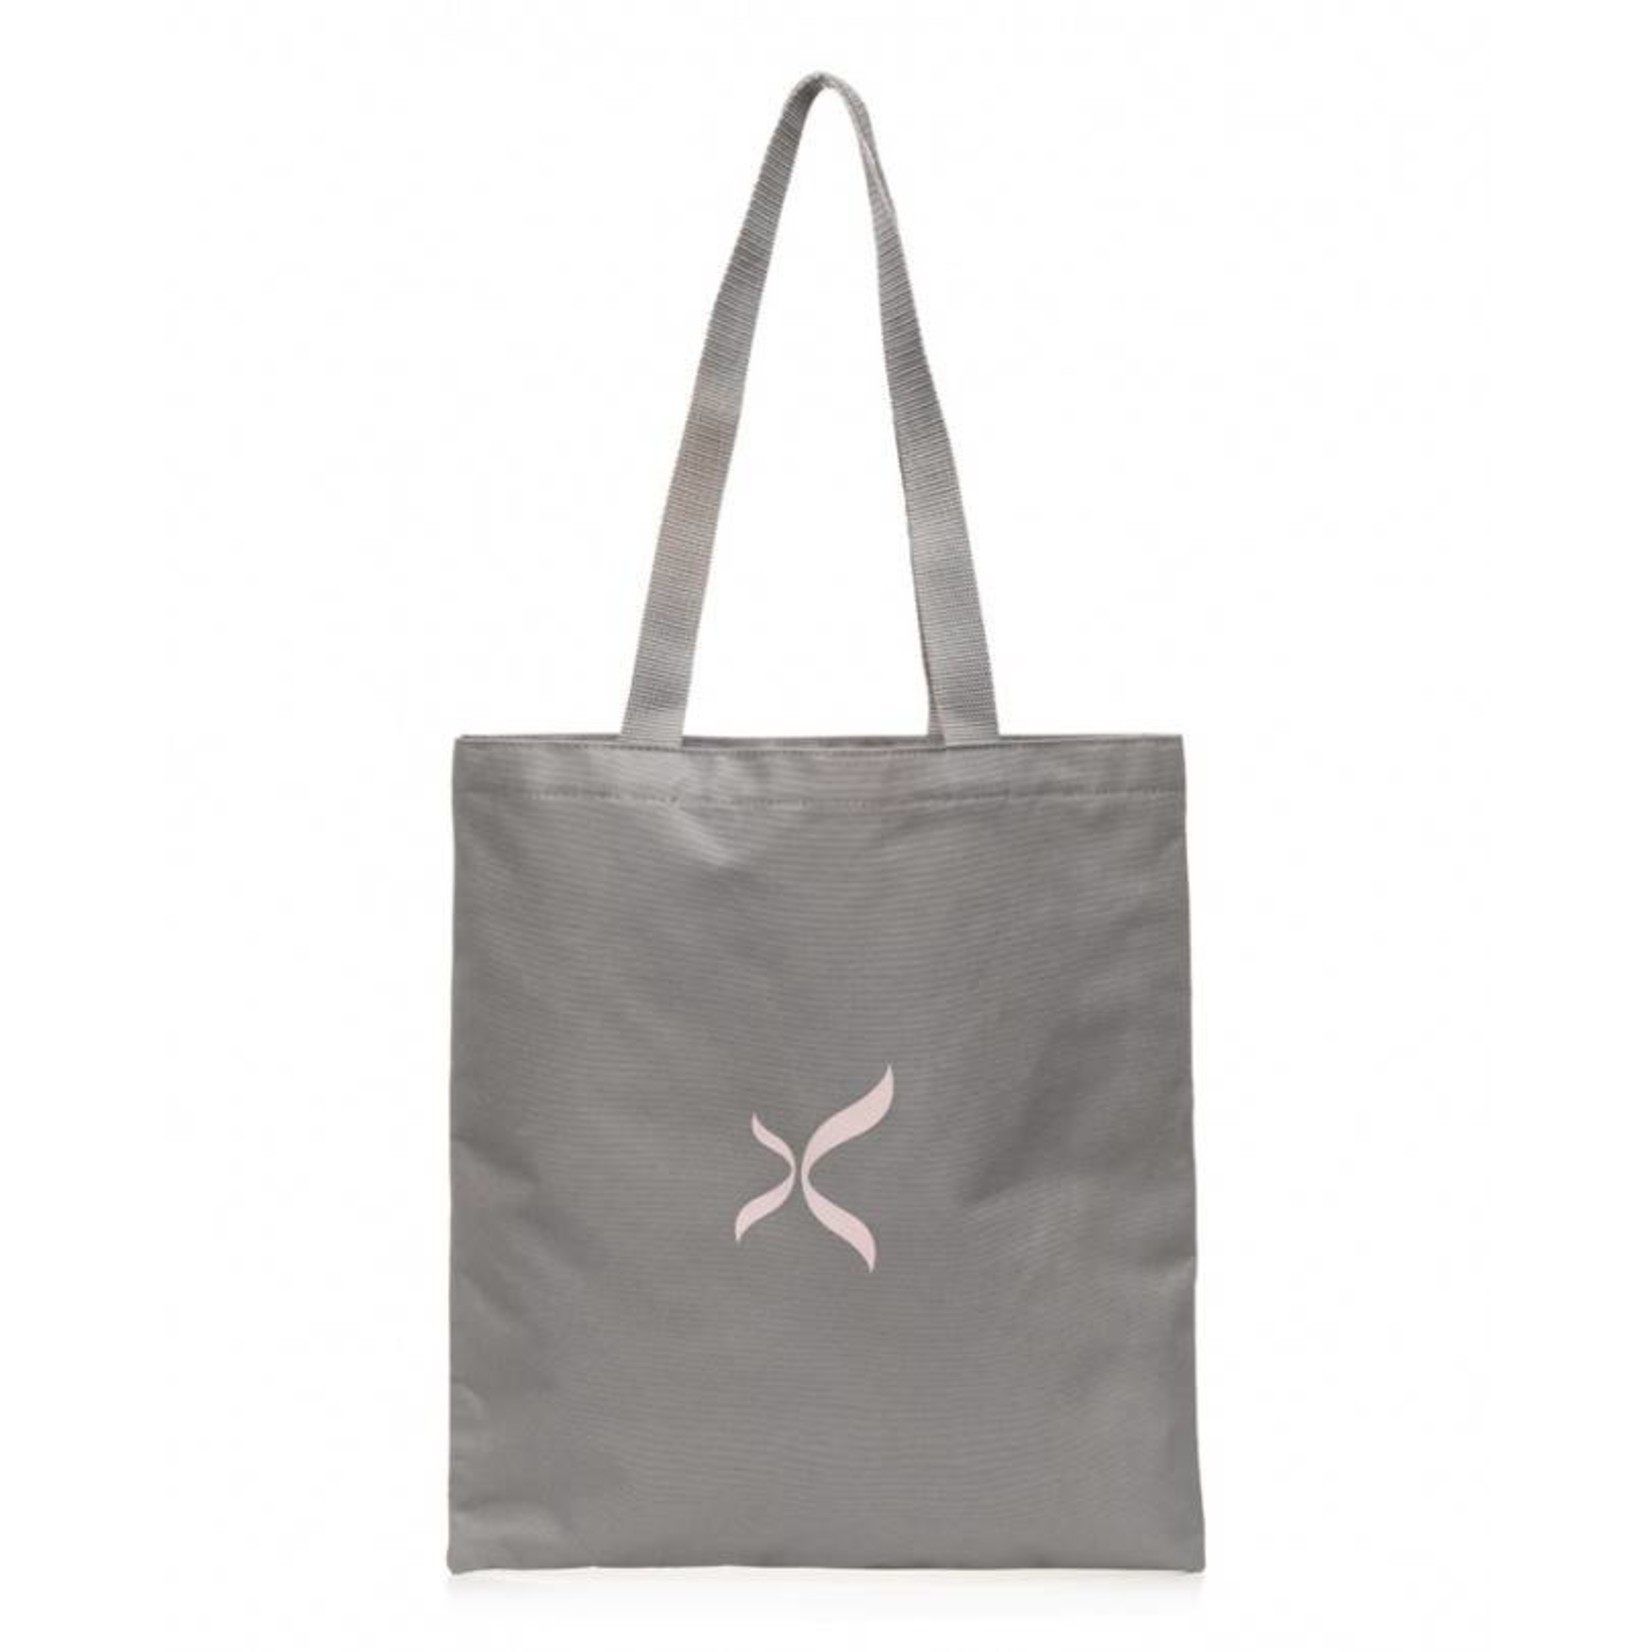 Capezio B172 Recycled Tote - GRY